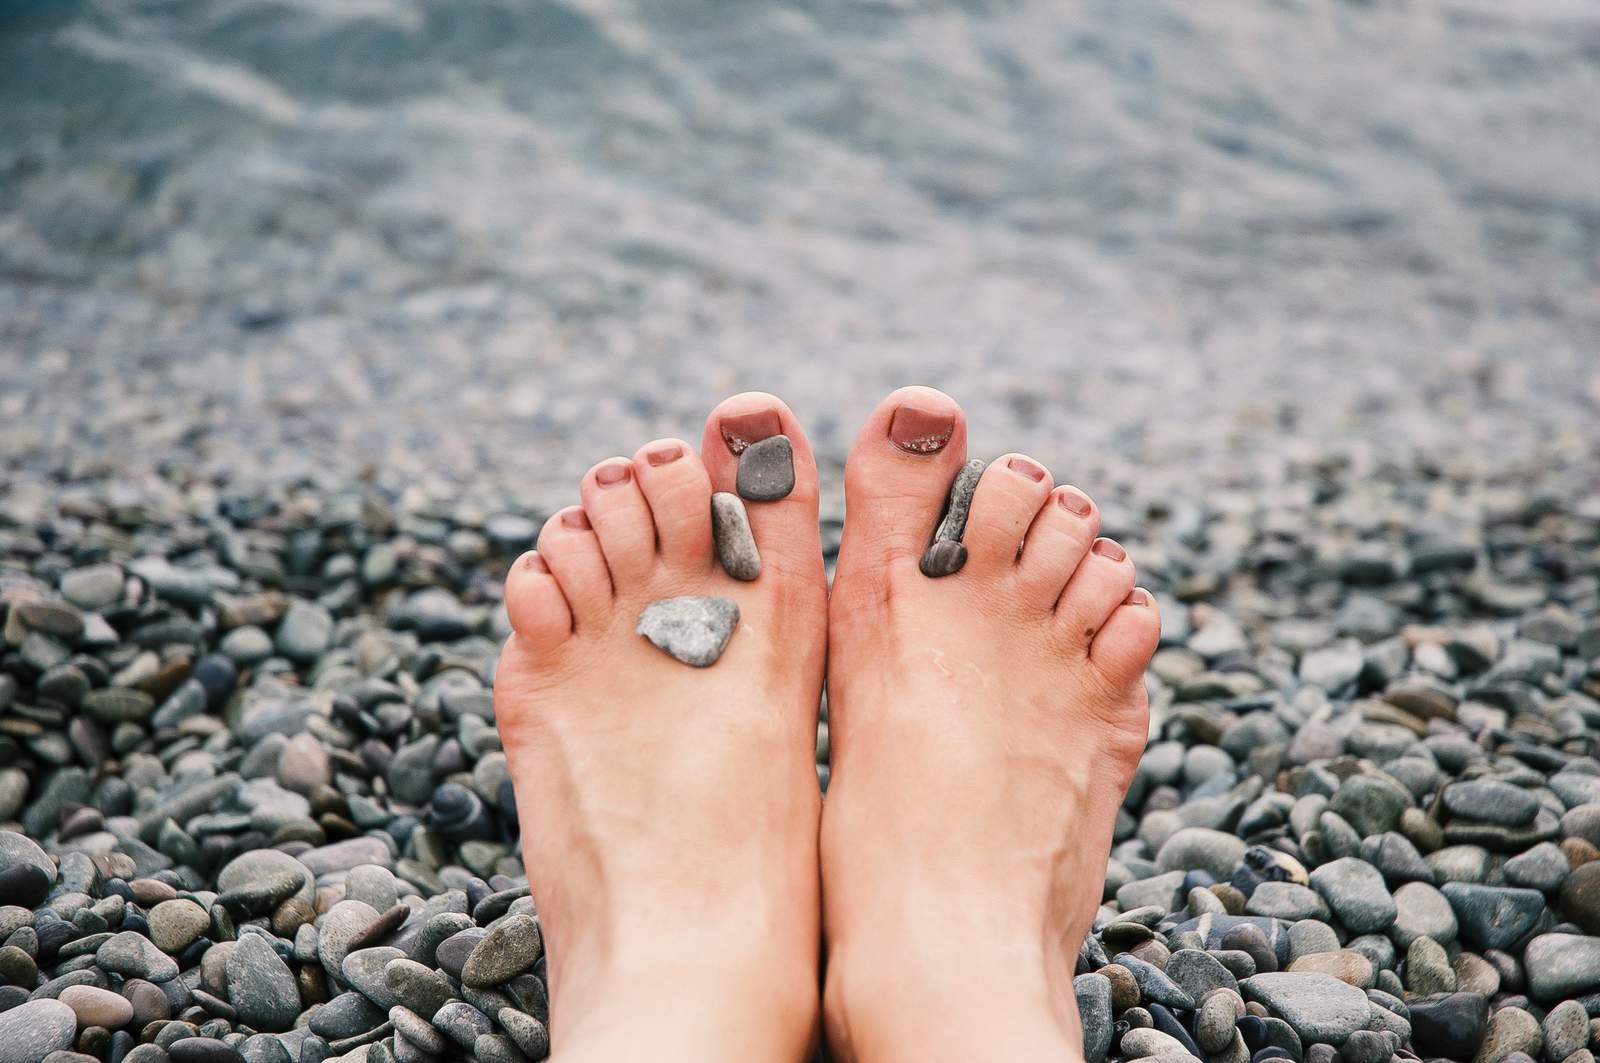 Podcast reminds us, especially in the sandal-wearing months: Stop neglecting your feet